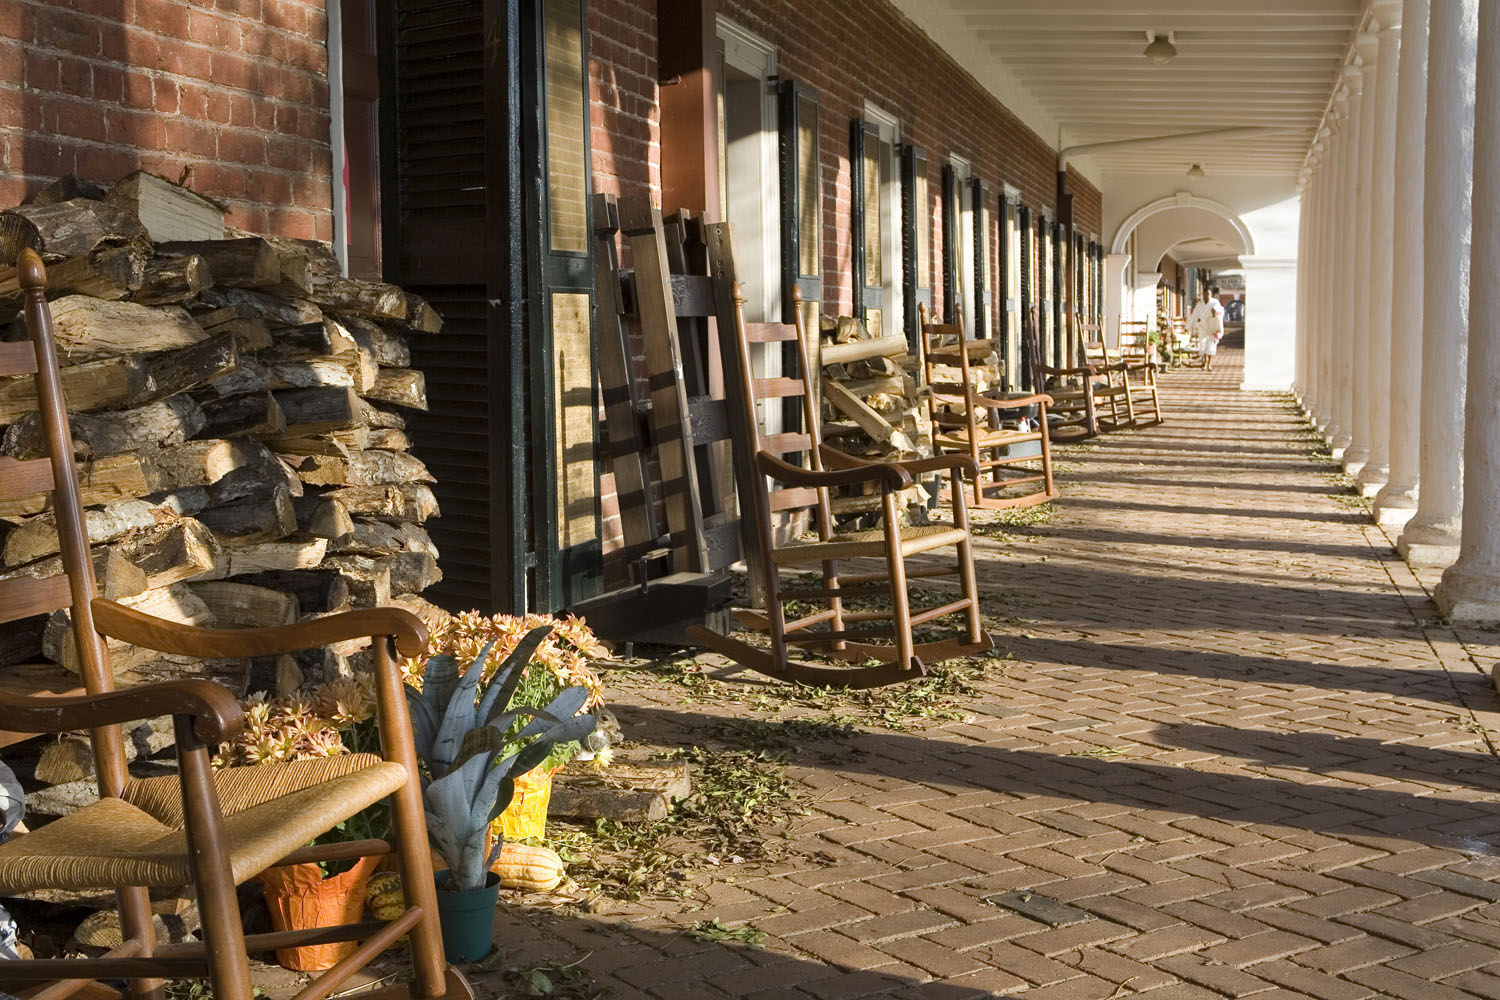 brick Sidewalk with rocking chairs and firewood outside of the rooms on the lawn